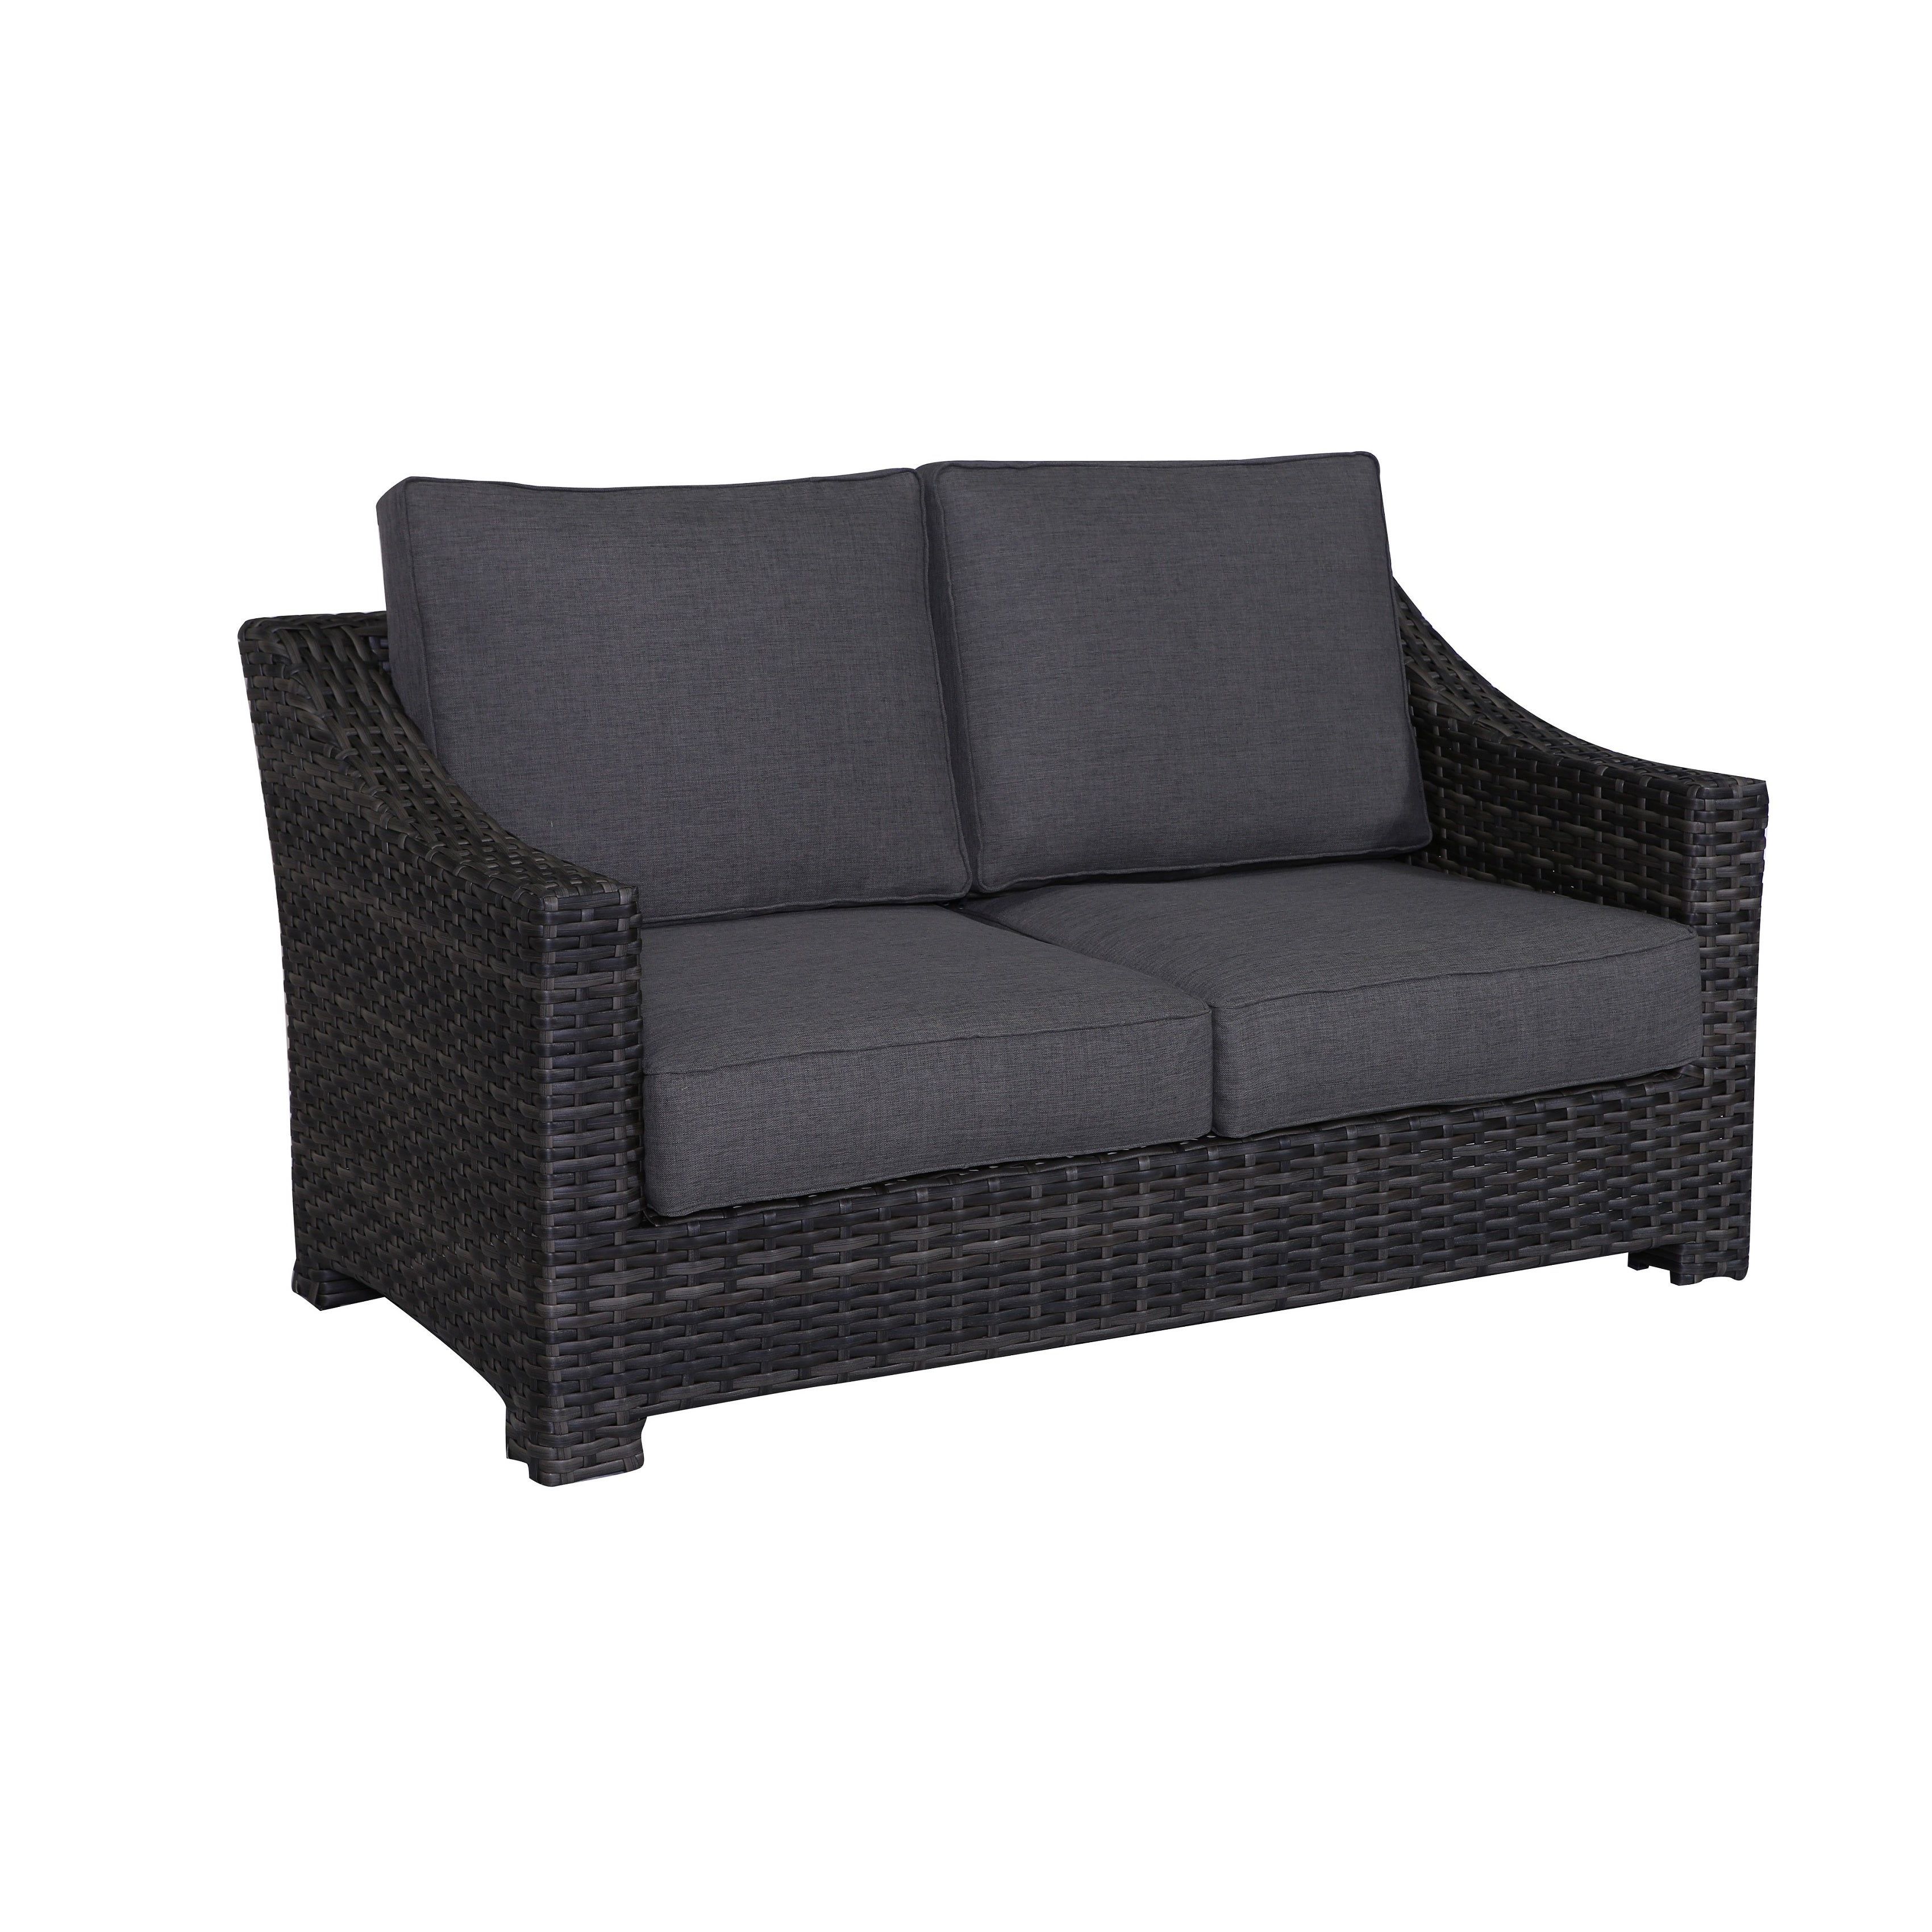 Bora Bora Grey Wicker Rattan Loveseat With Olefin Cushion Within Most Popular Baltic Loveseats With Cushions (View 20 of 25)